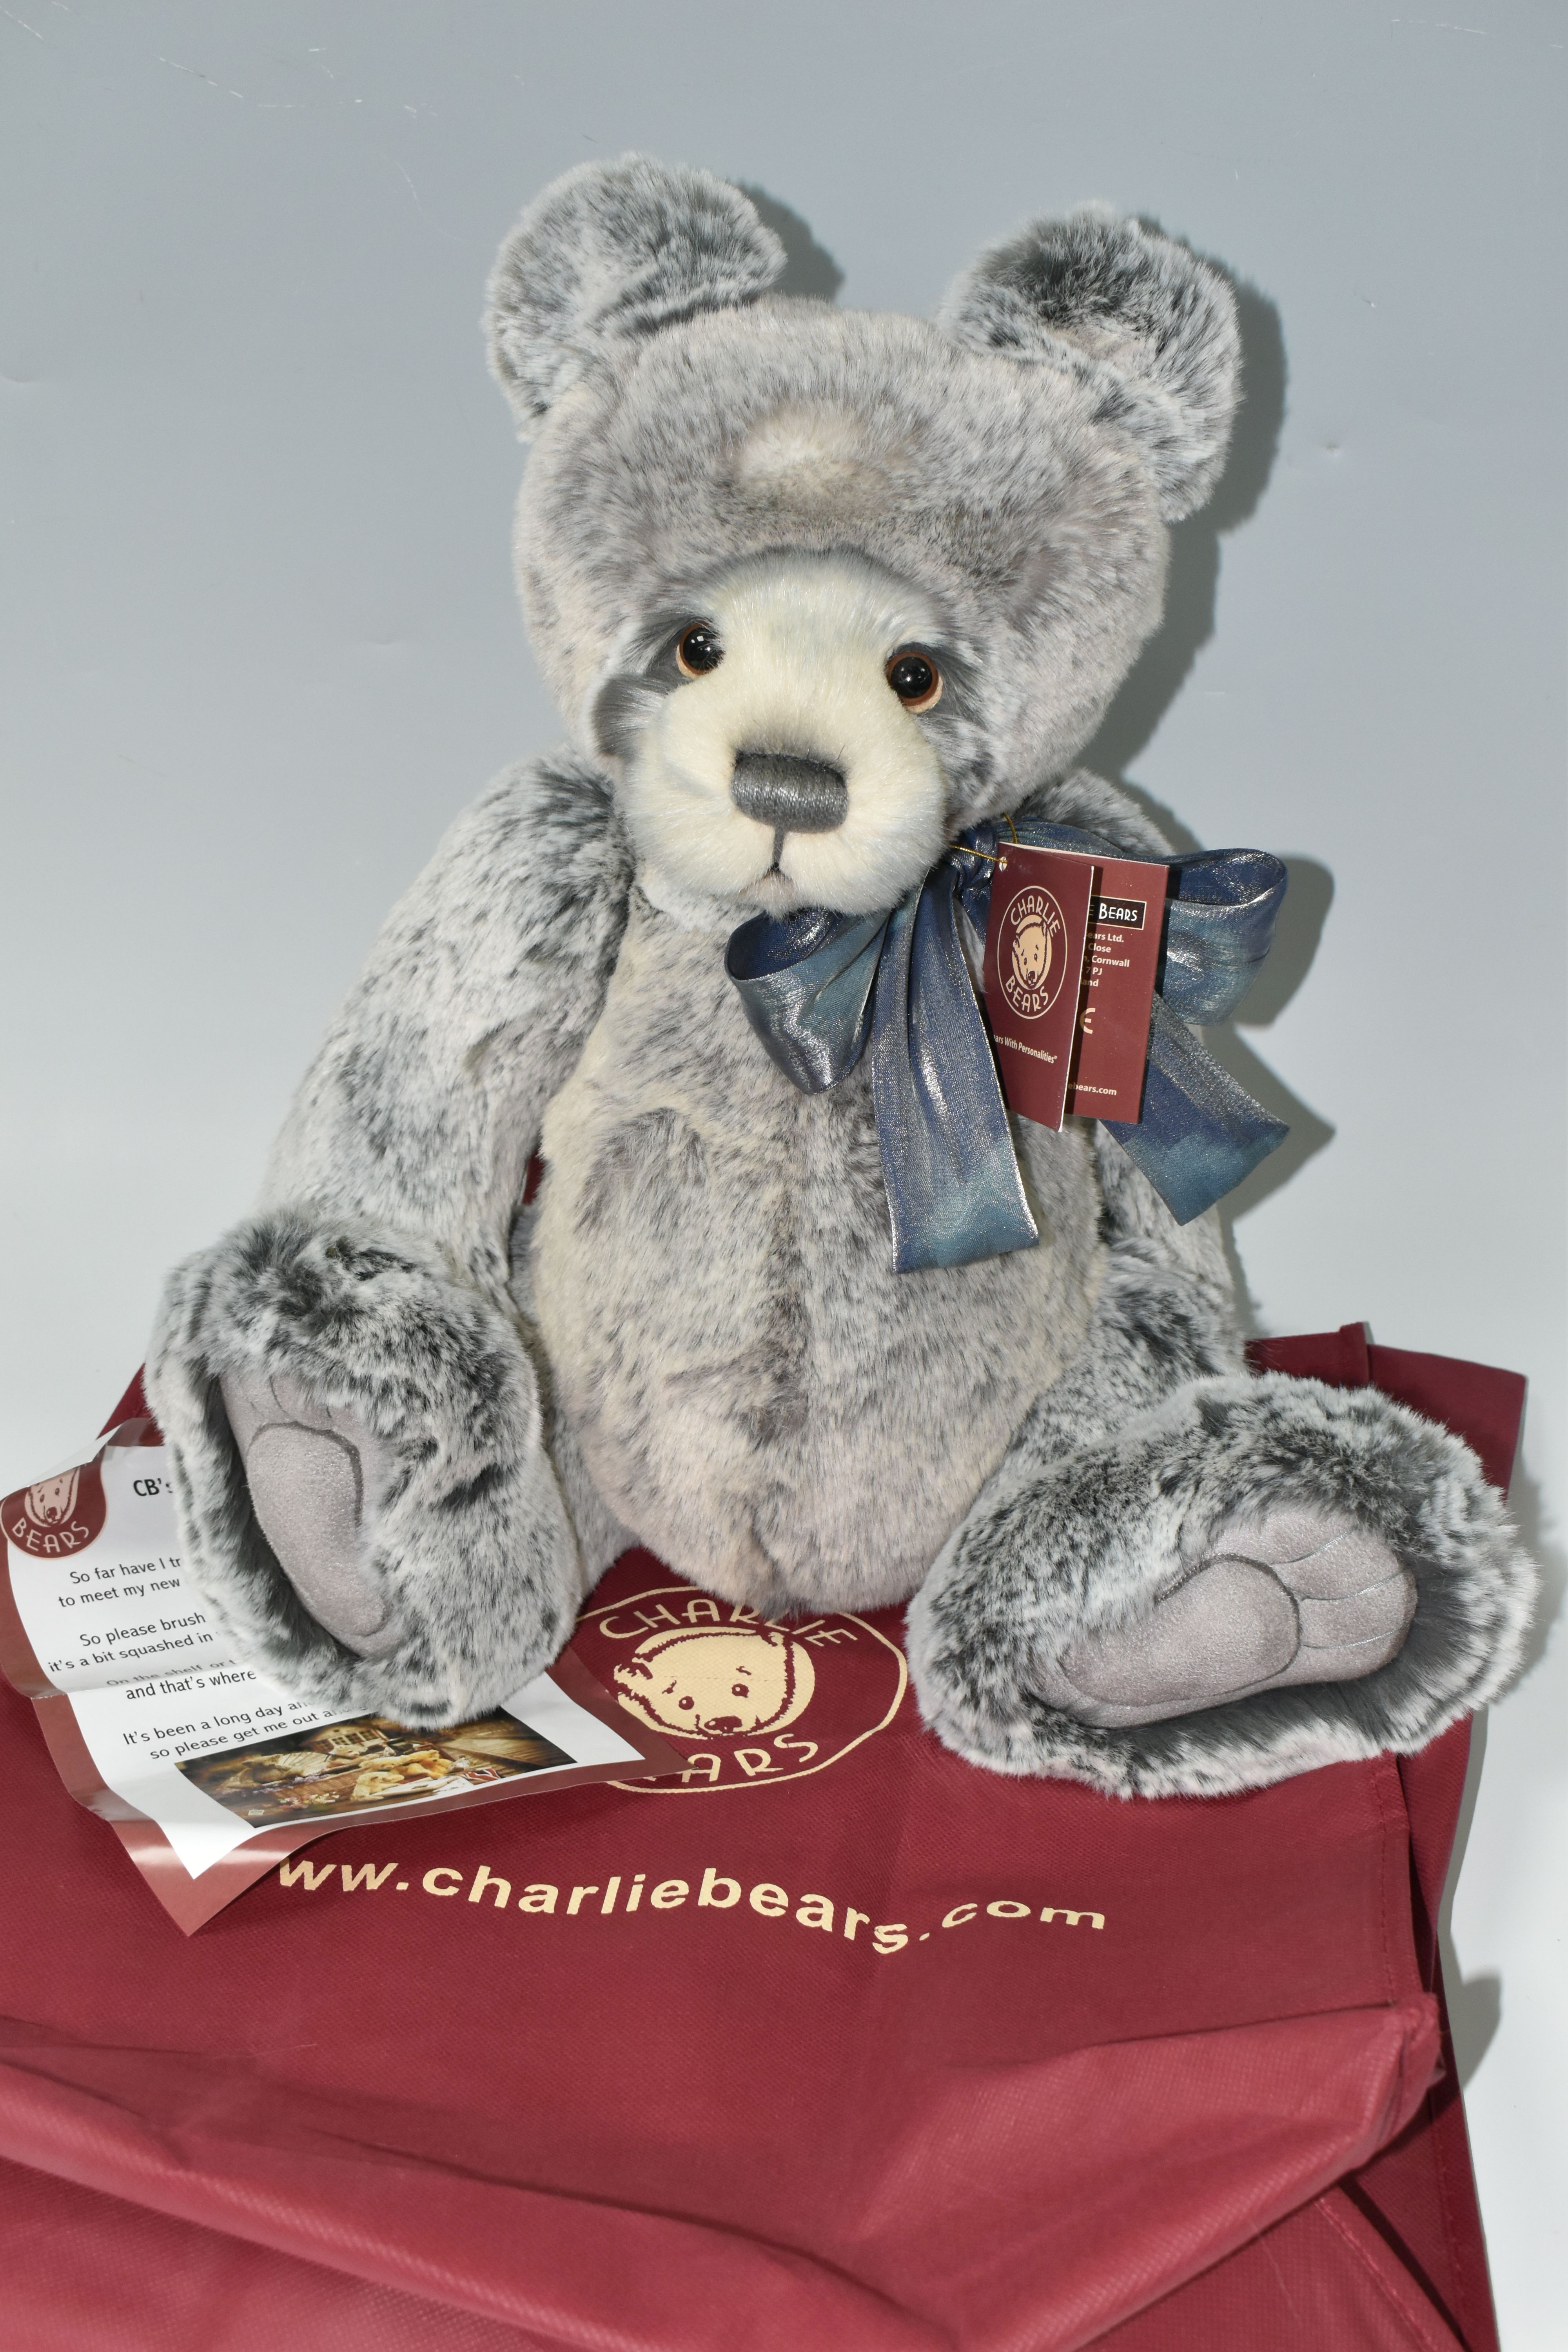 A CHARLIE BEAR 'NIMBUS' BEAR, CB 141420 designed by Isabelle Lee, with original dust bag and